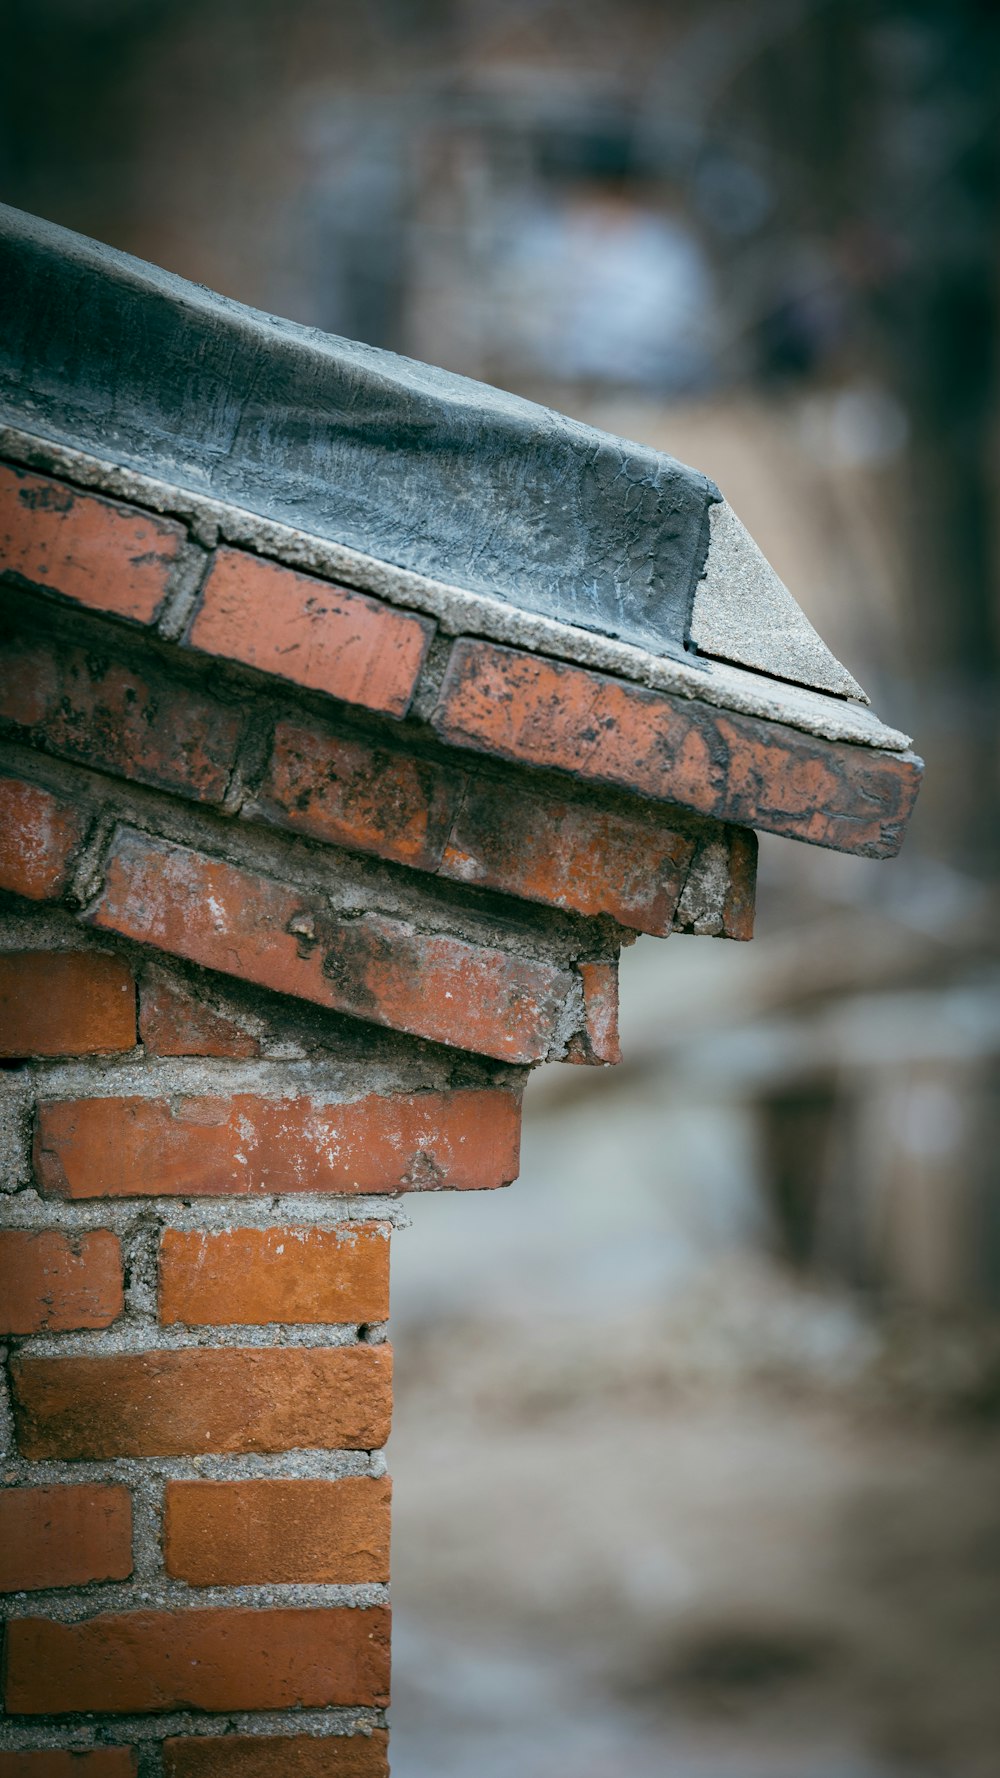 a close up of a brick chimney on a building